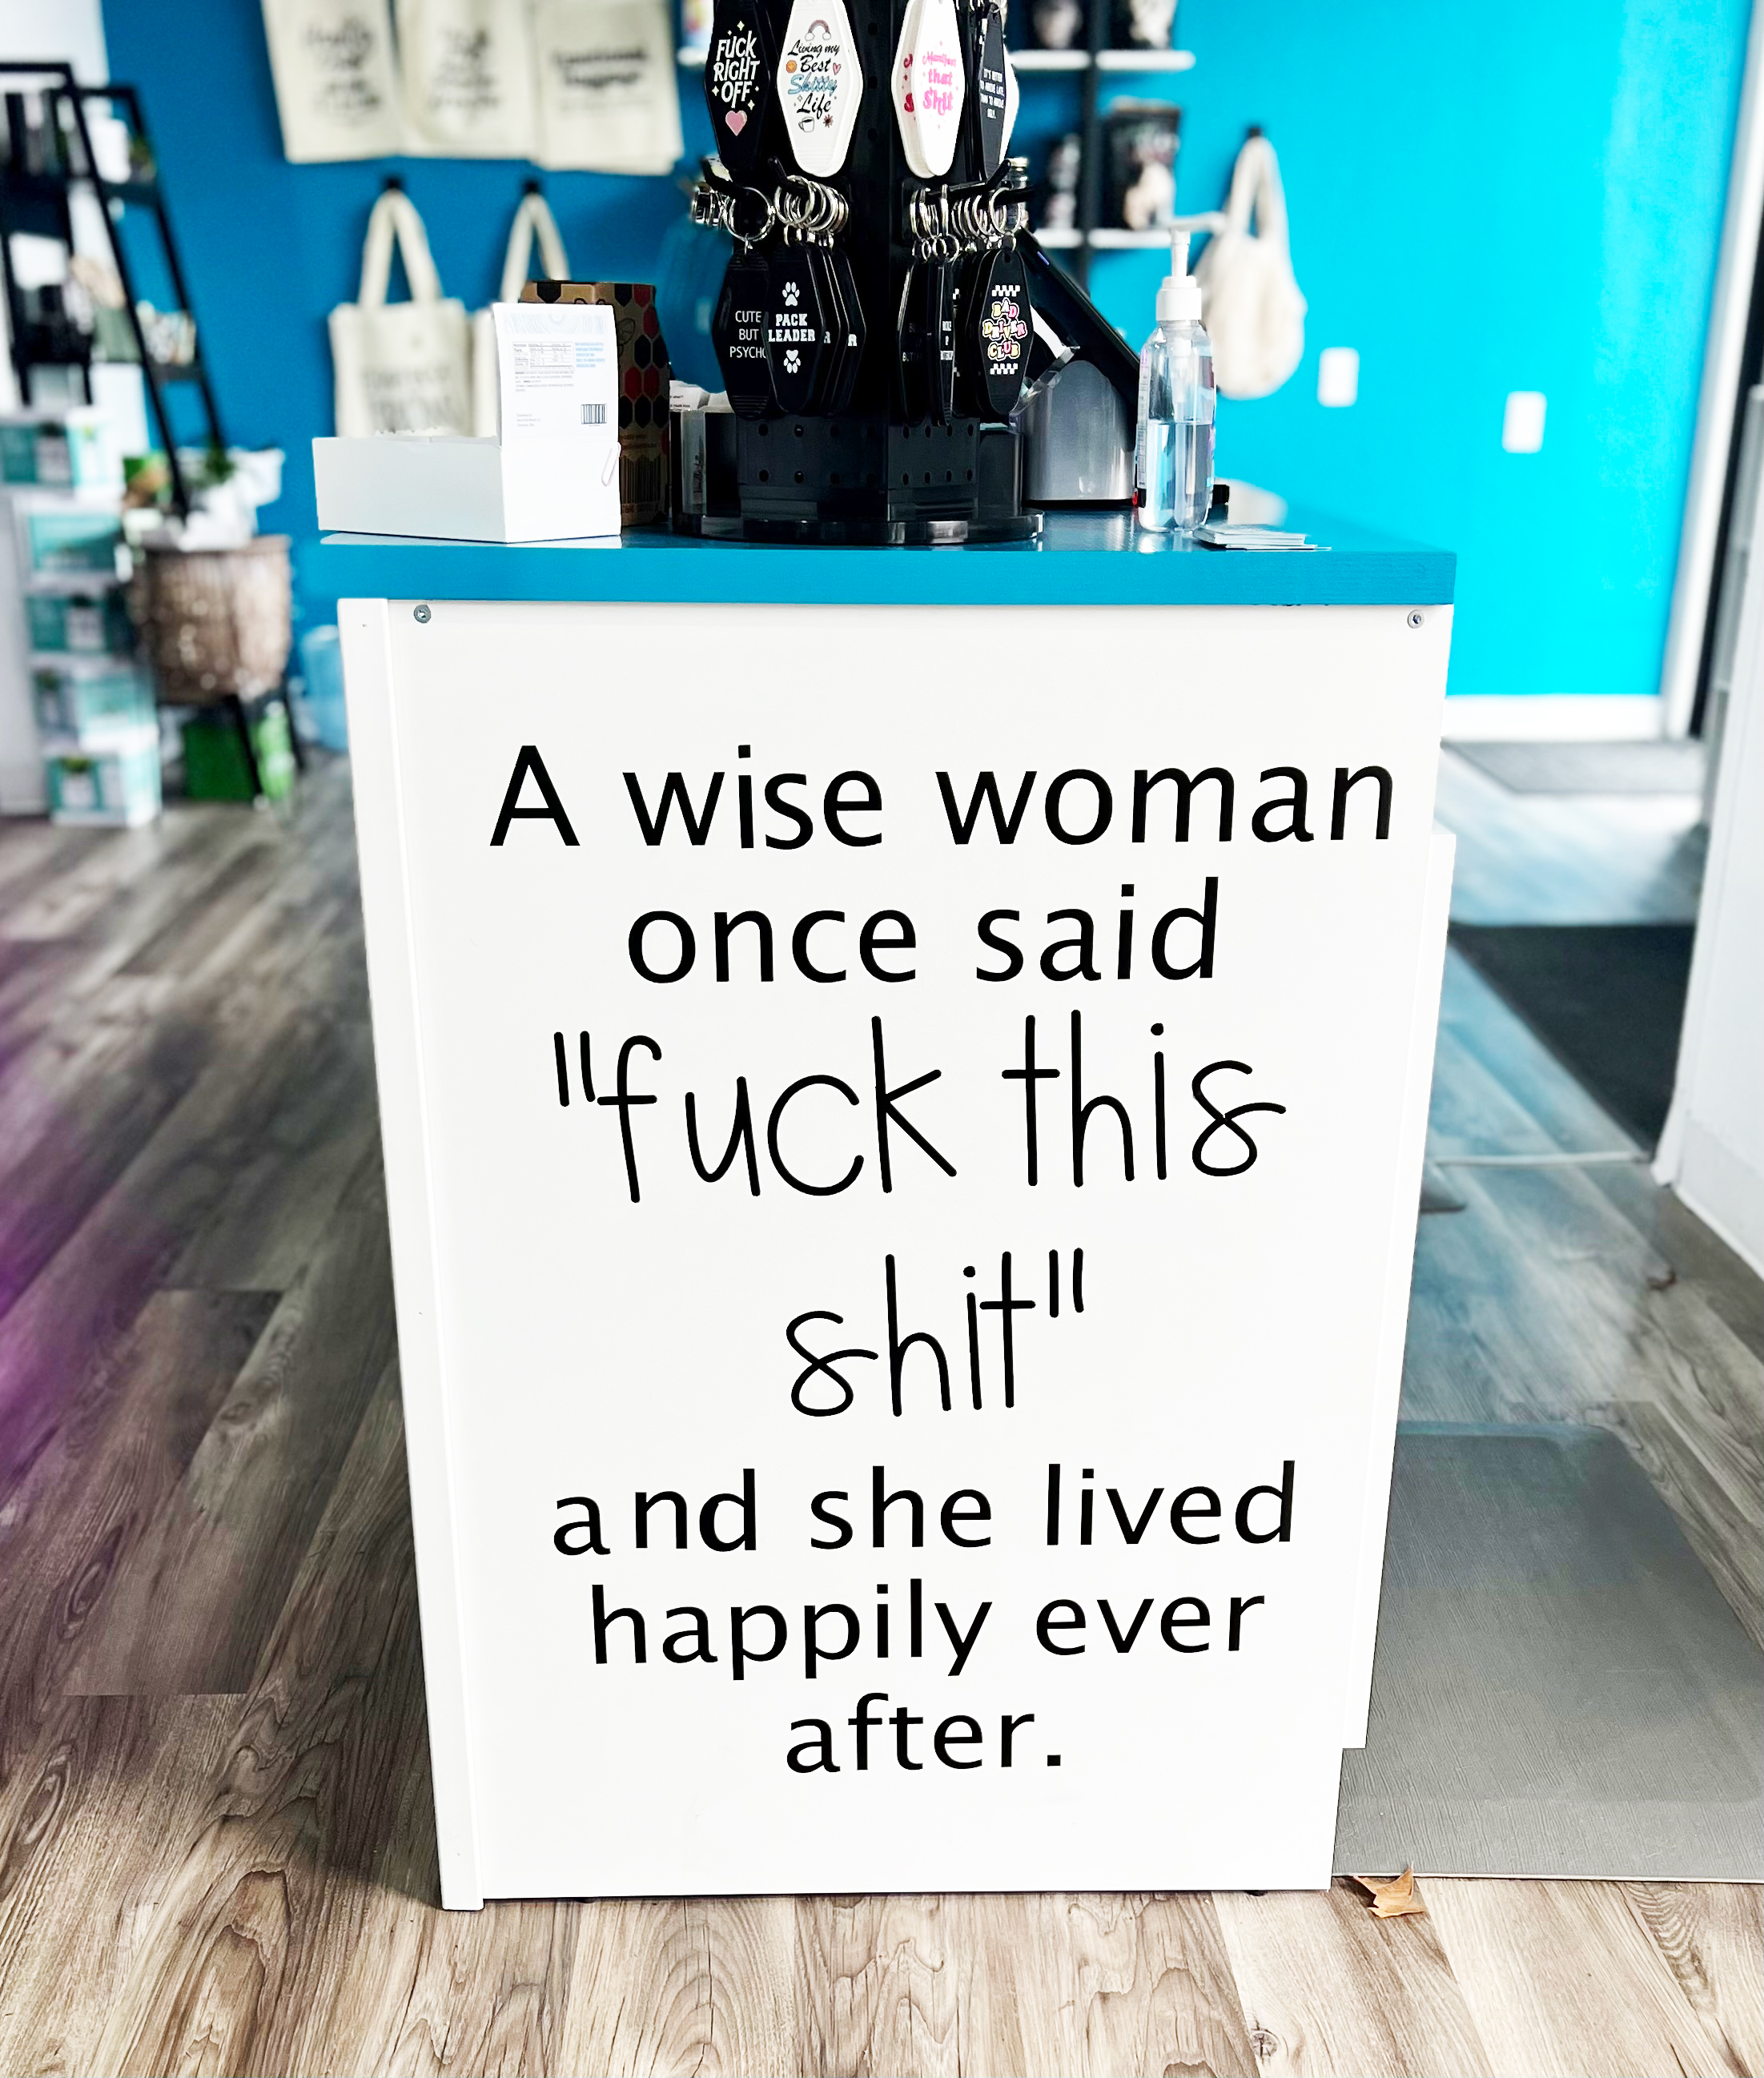 Sign near the entryway of The Teal Box that reads: "A wise woman once said ‘Fuck this shit’ and she lived happily ever after.”